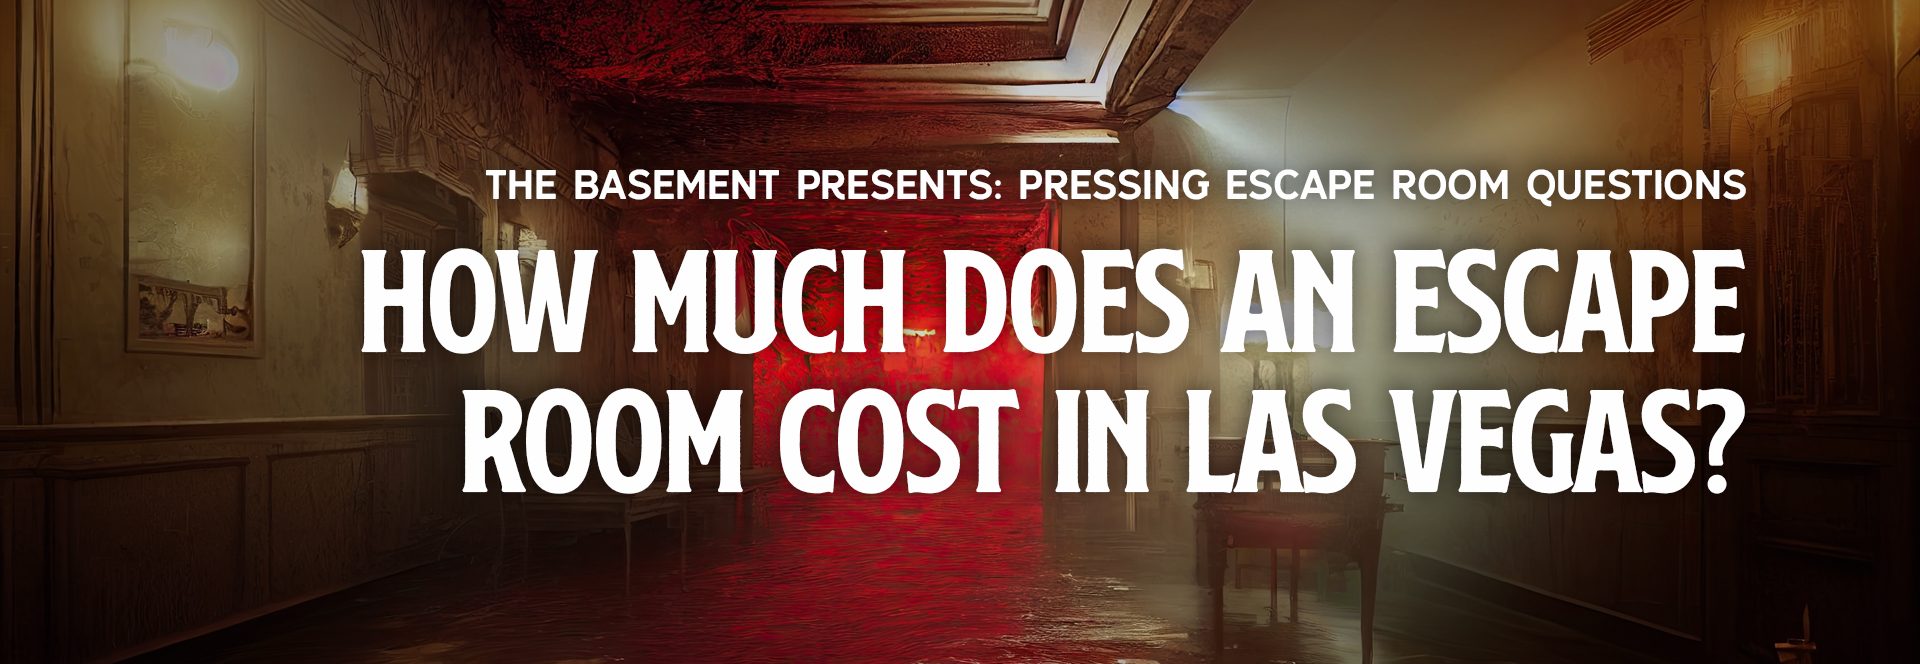 How Much Does An Escape Room Cost in Las Vegas?